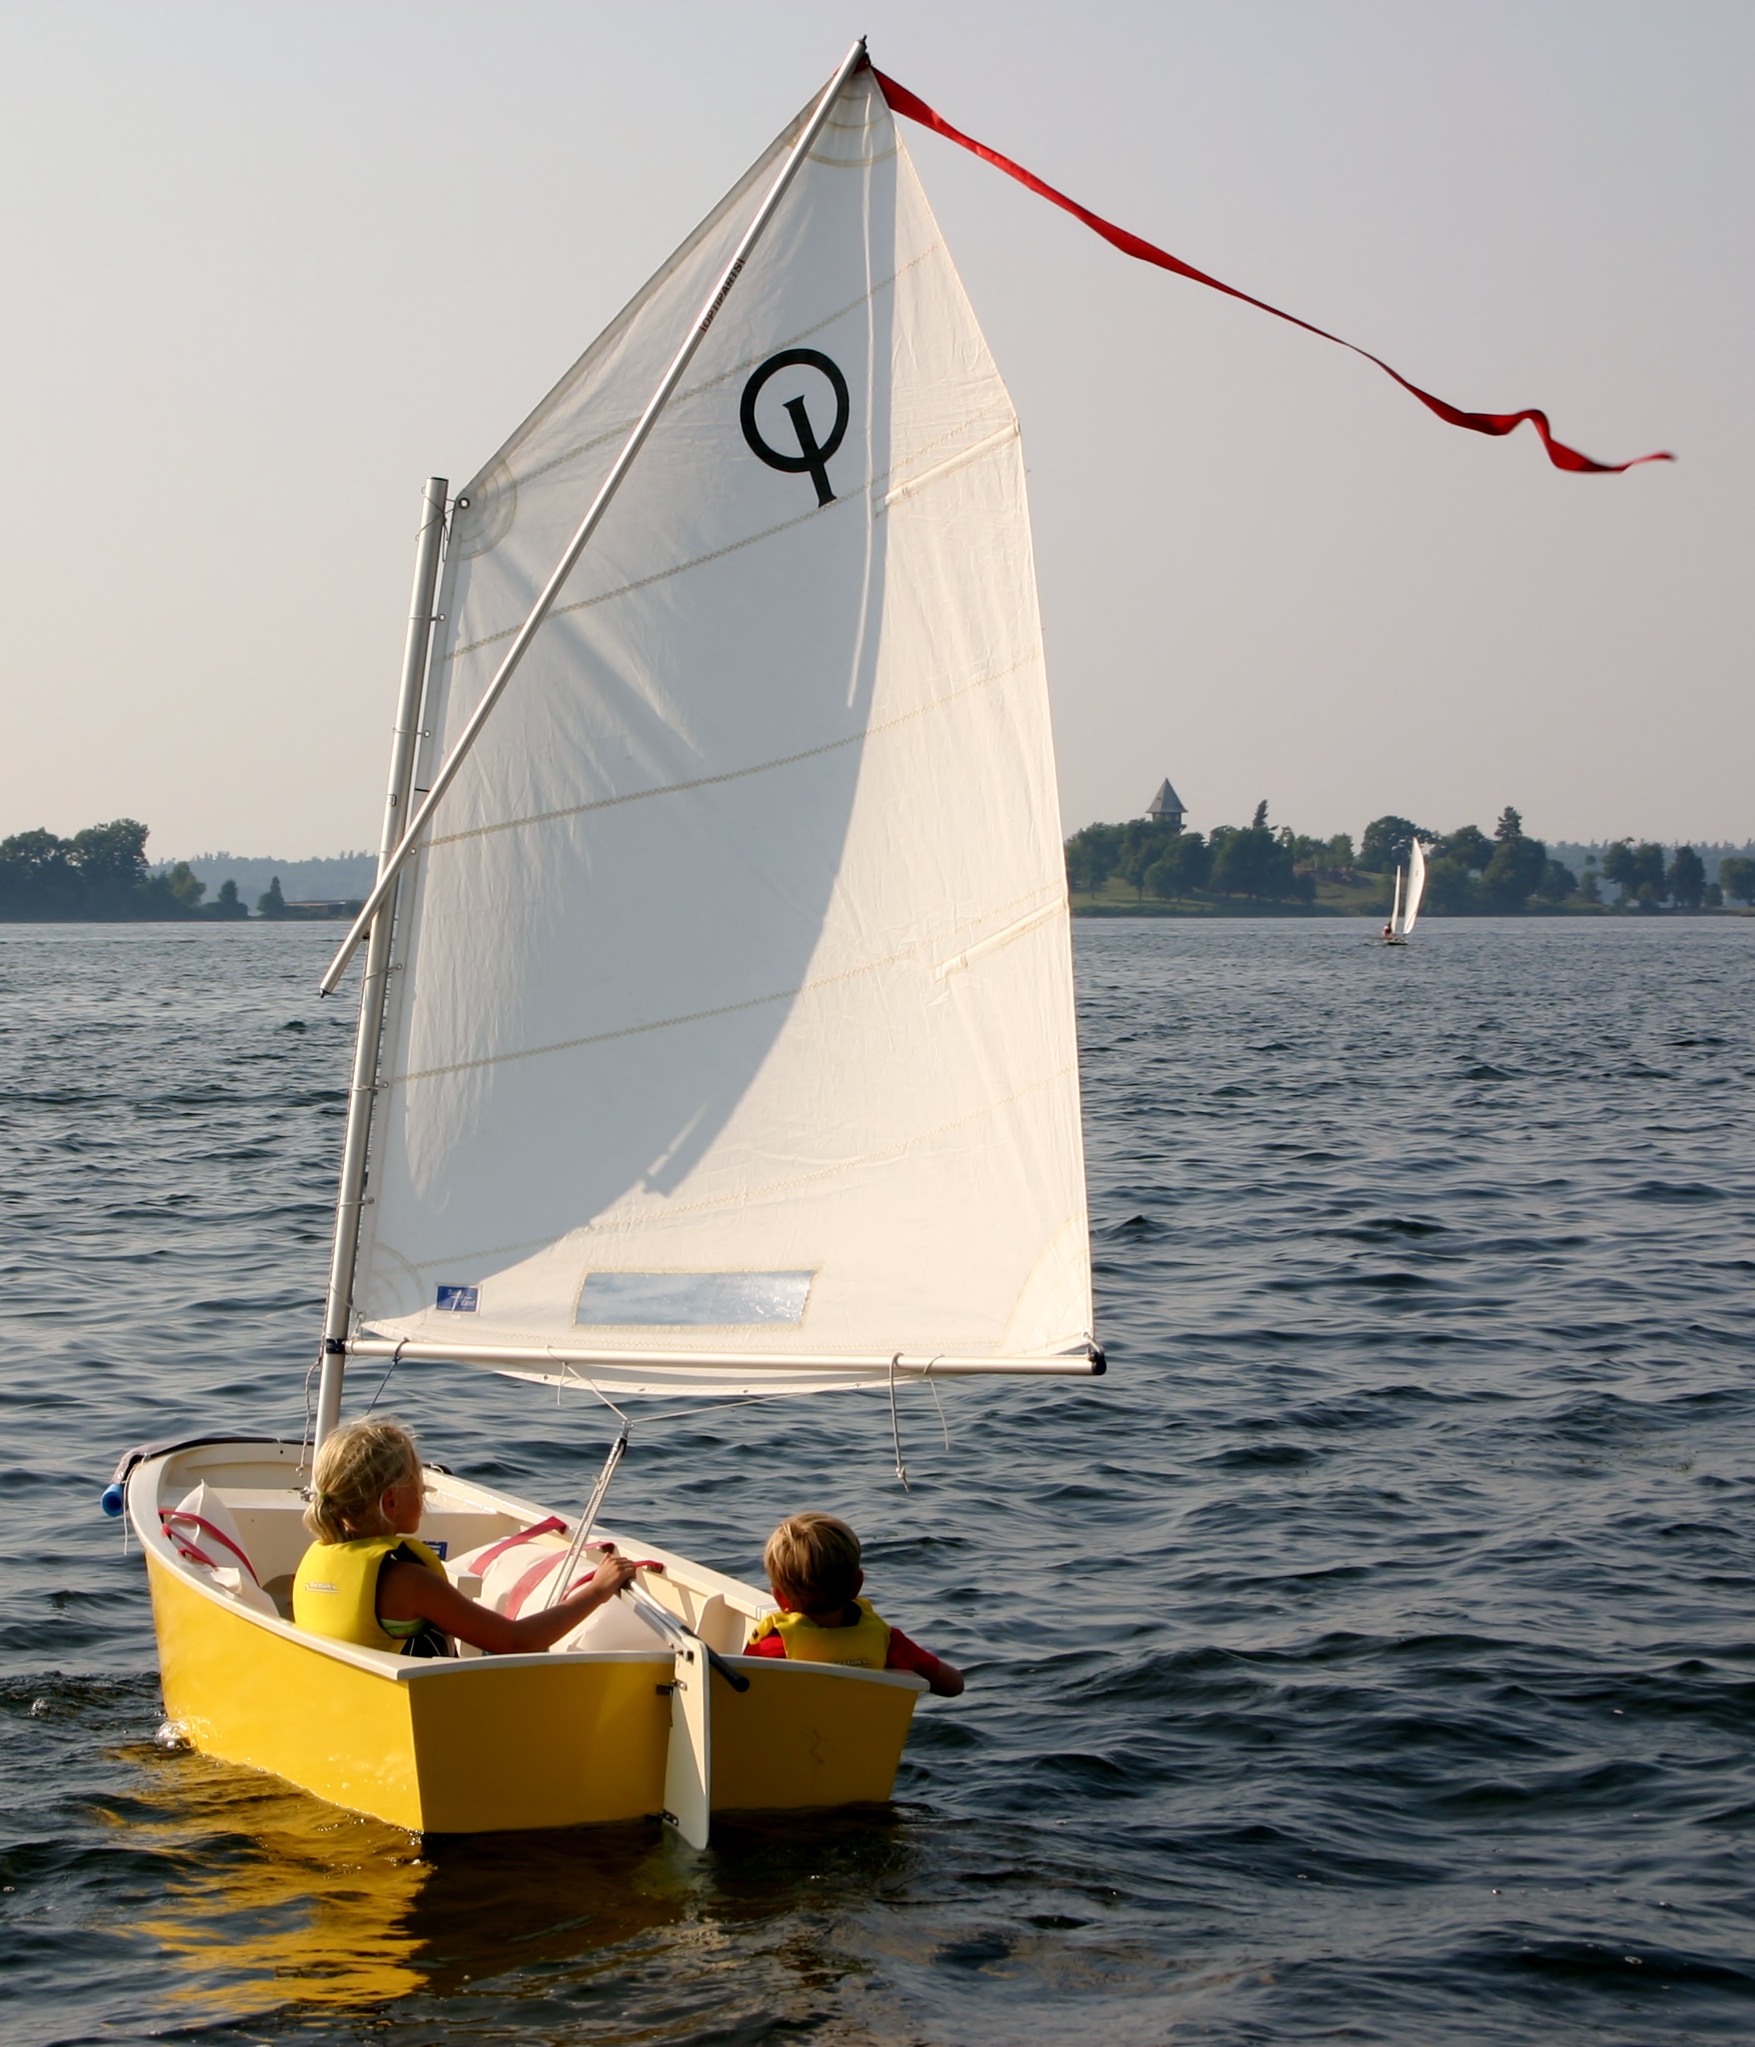 New Jersey Wood Boats For Sale Variety What Is Sailing Boat Used For